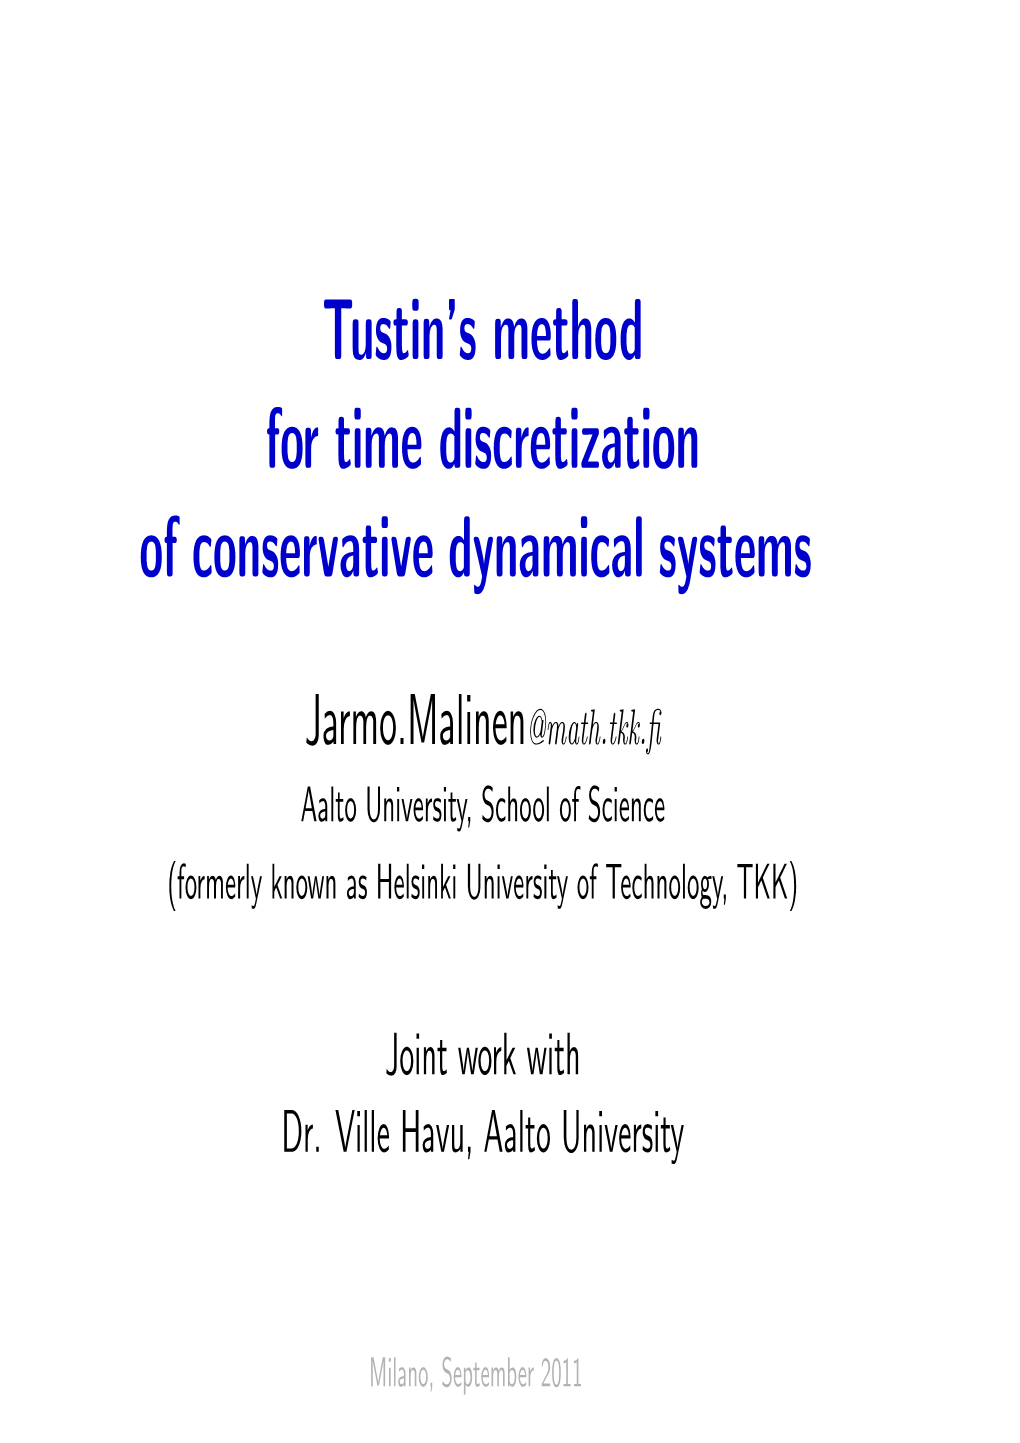 Tustin's Method for Time Discretization of Conservative Dynamical Systems